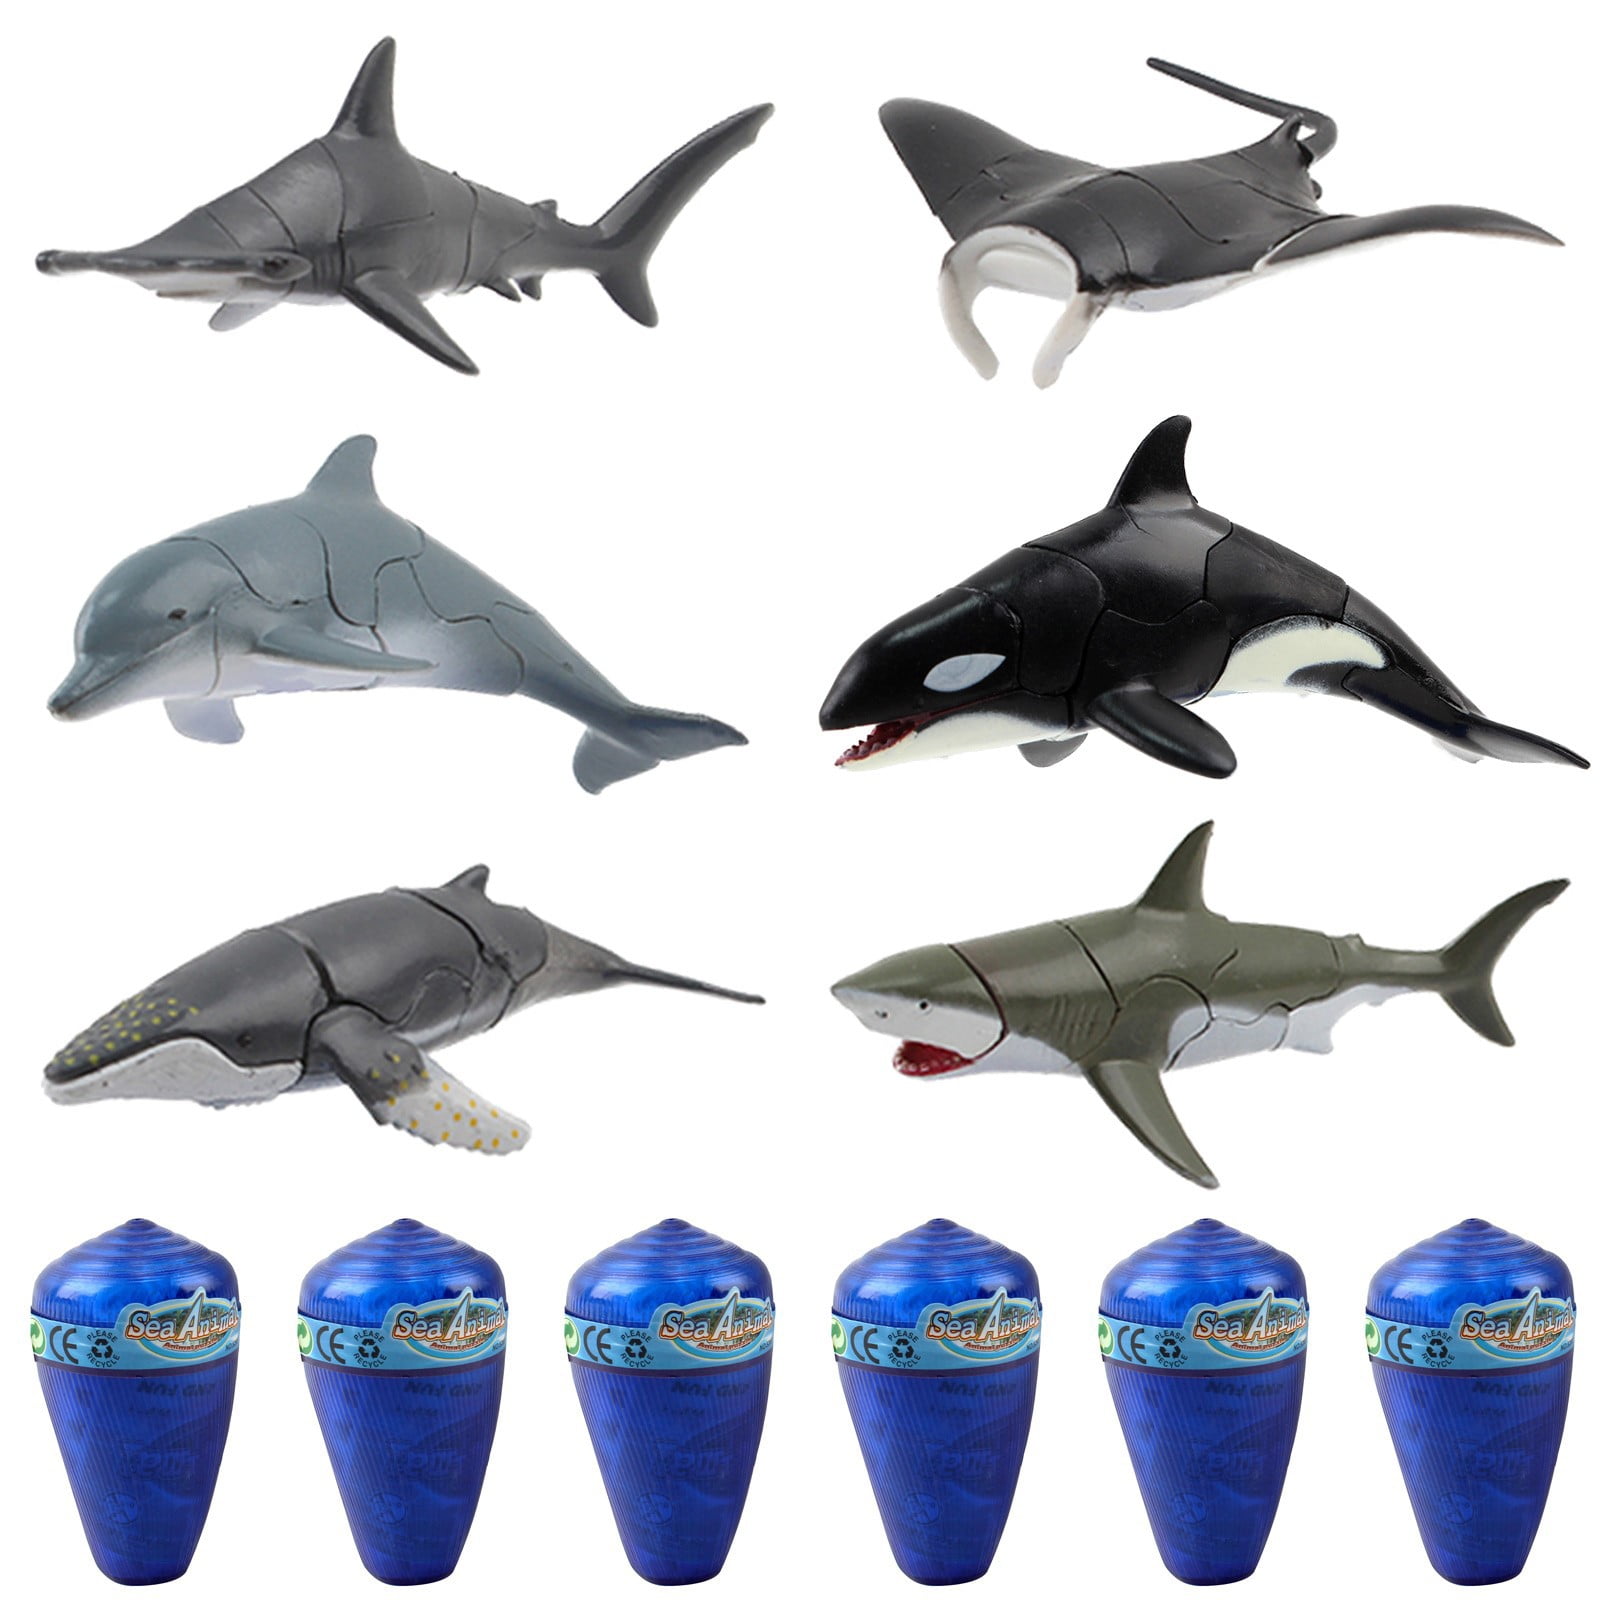 6 Boxes of Sea Life Animals Building Blocks Sets 6 in 1 Great Christmas Gifts 